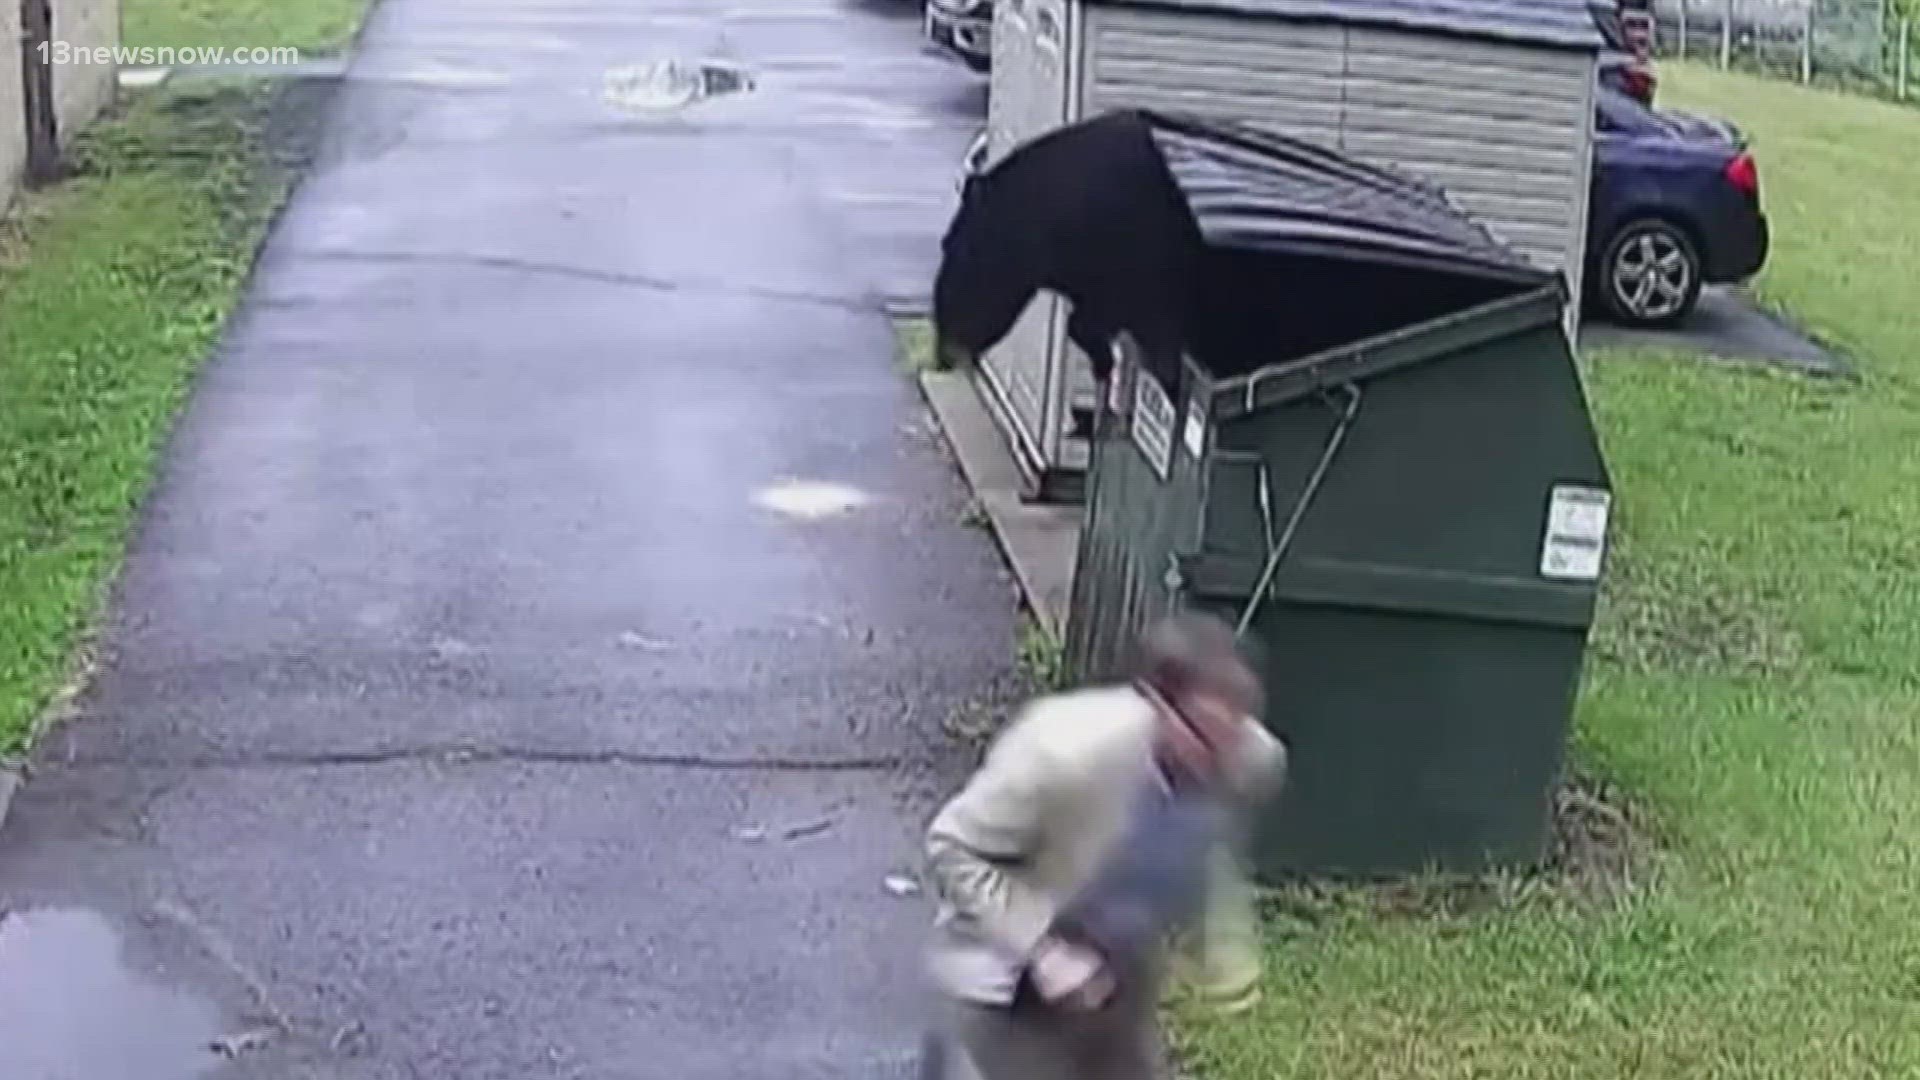 A school principal in West Virginia got the scare of his life when a large black bear suddenly jumped out of a dumpster he had been trying to open.